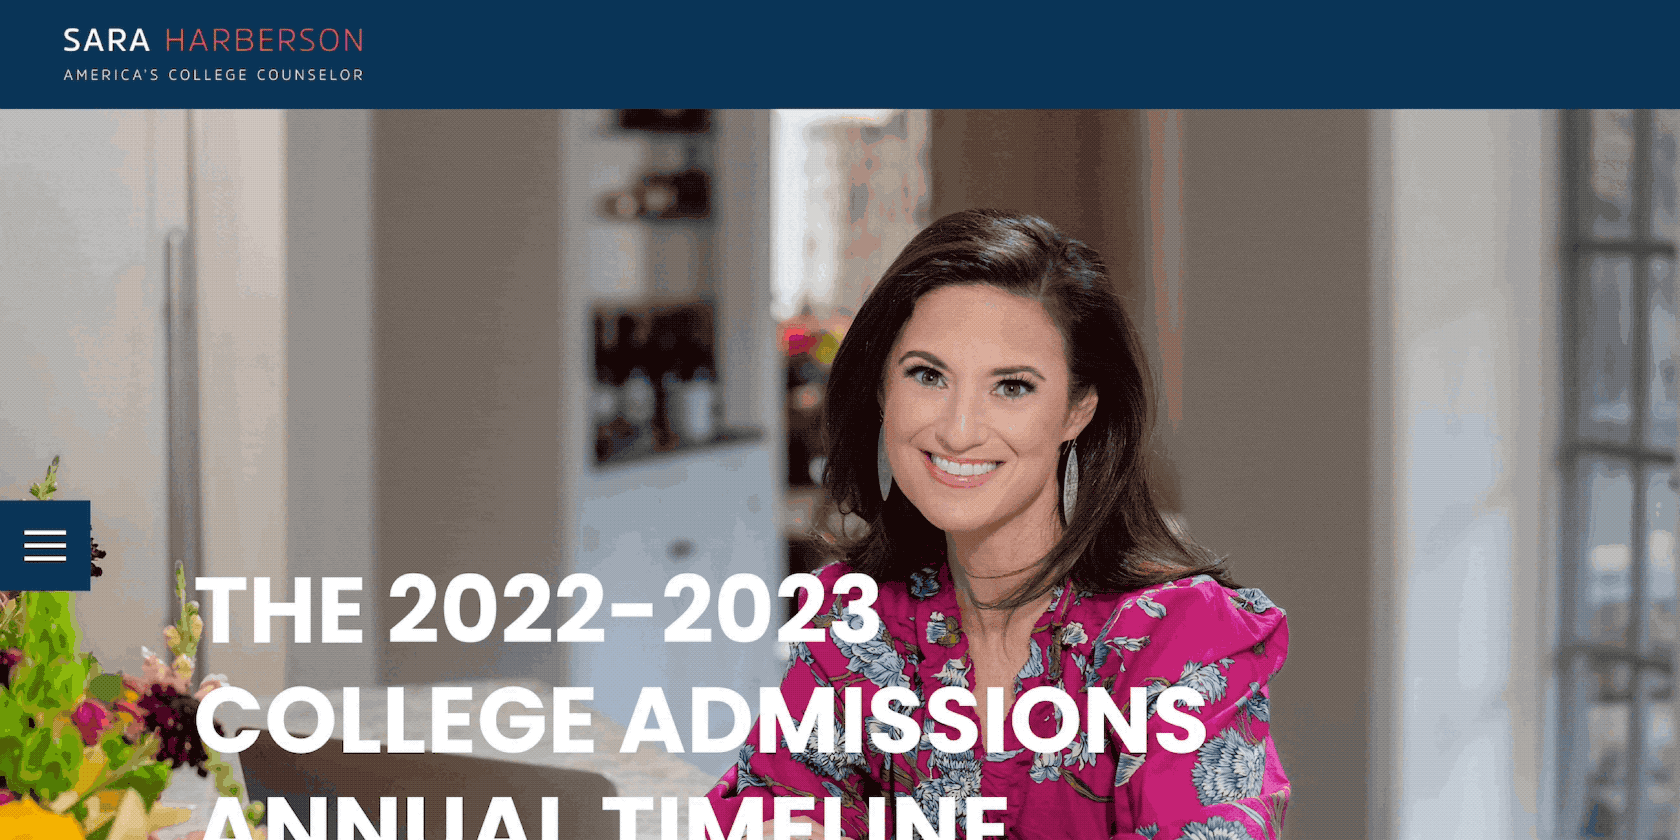 College Admissions Annual Timeline 